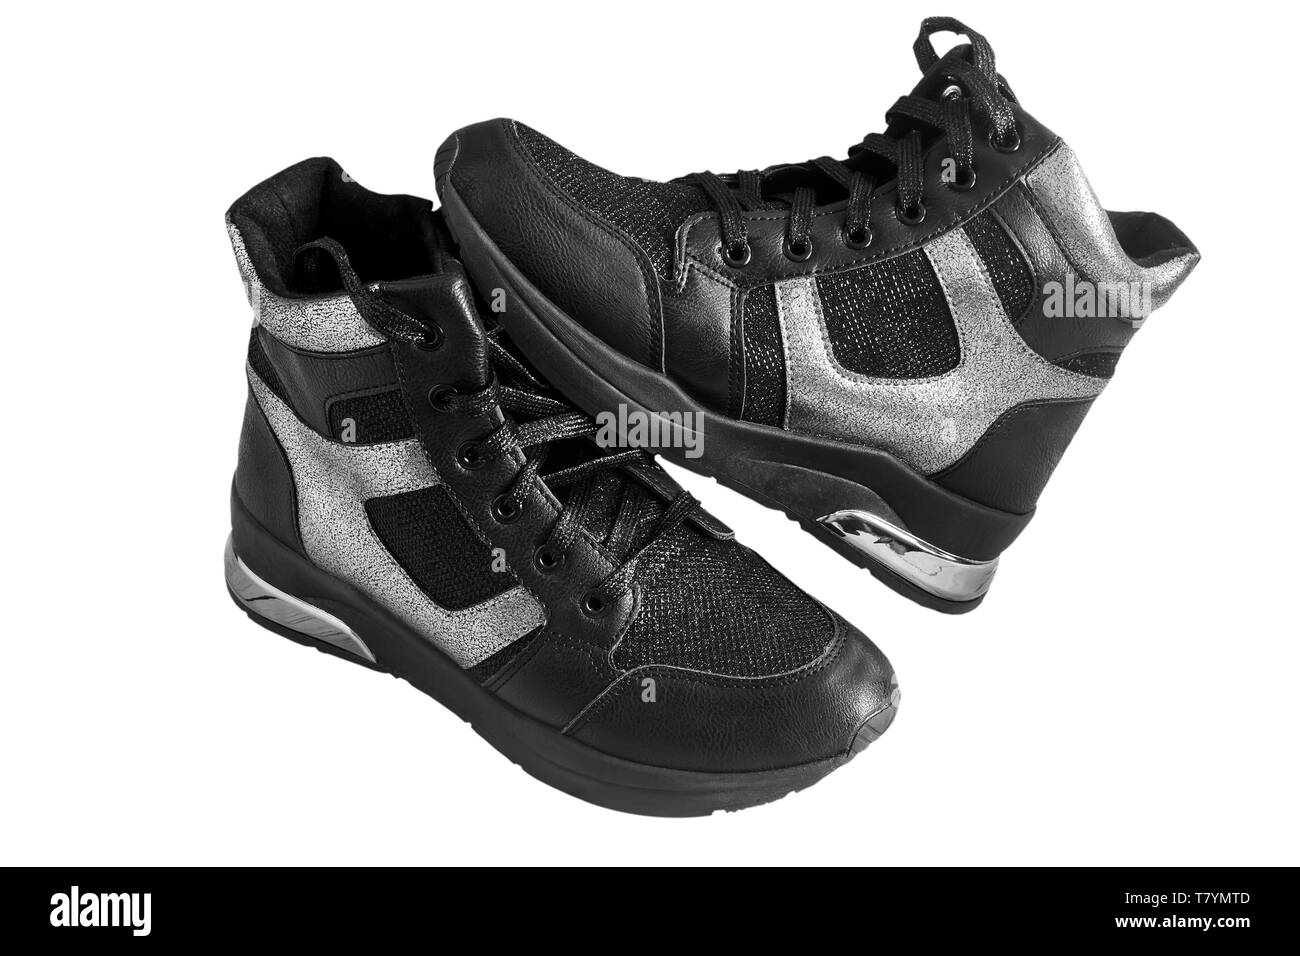 Football Boots Black and White Stock Photos & Images - Alamy